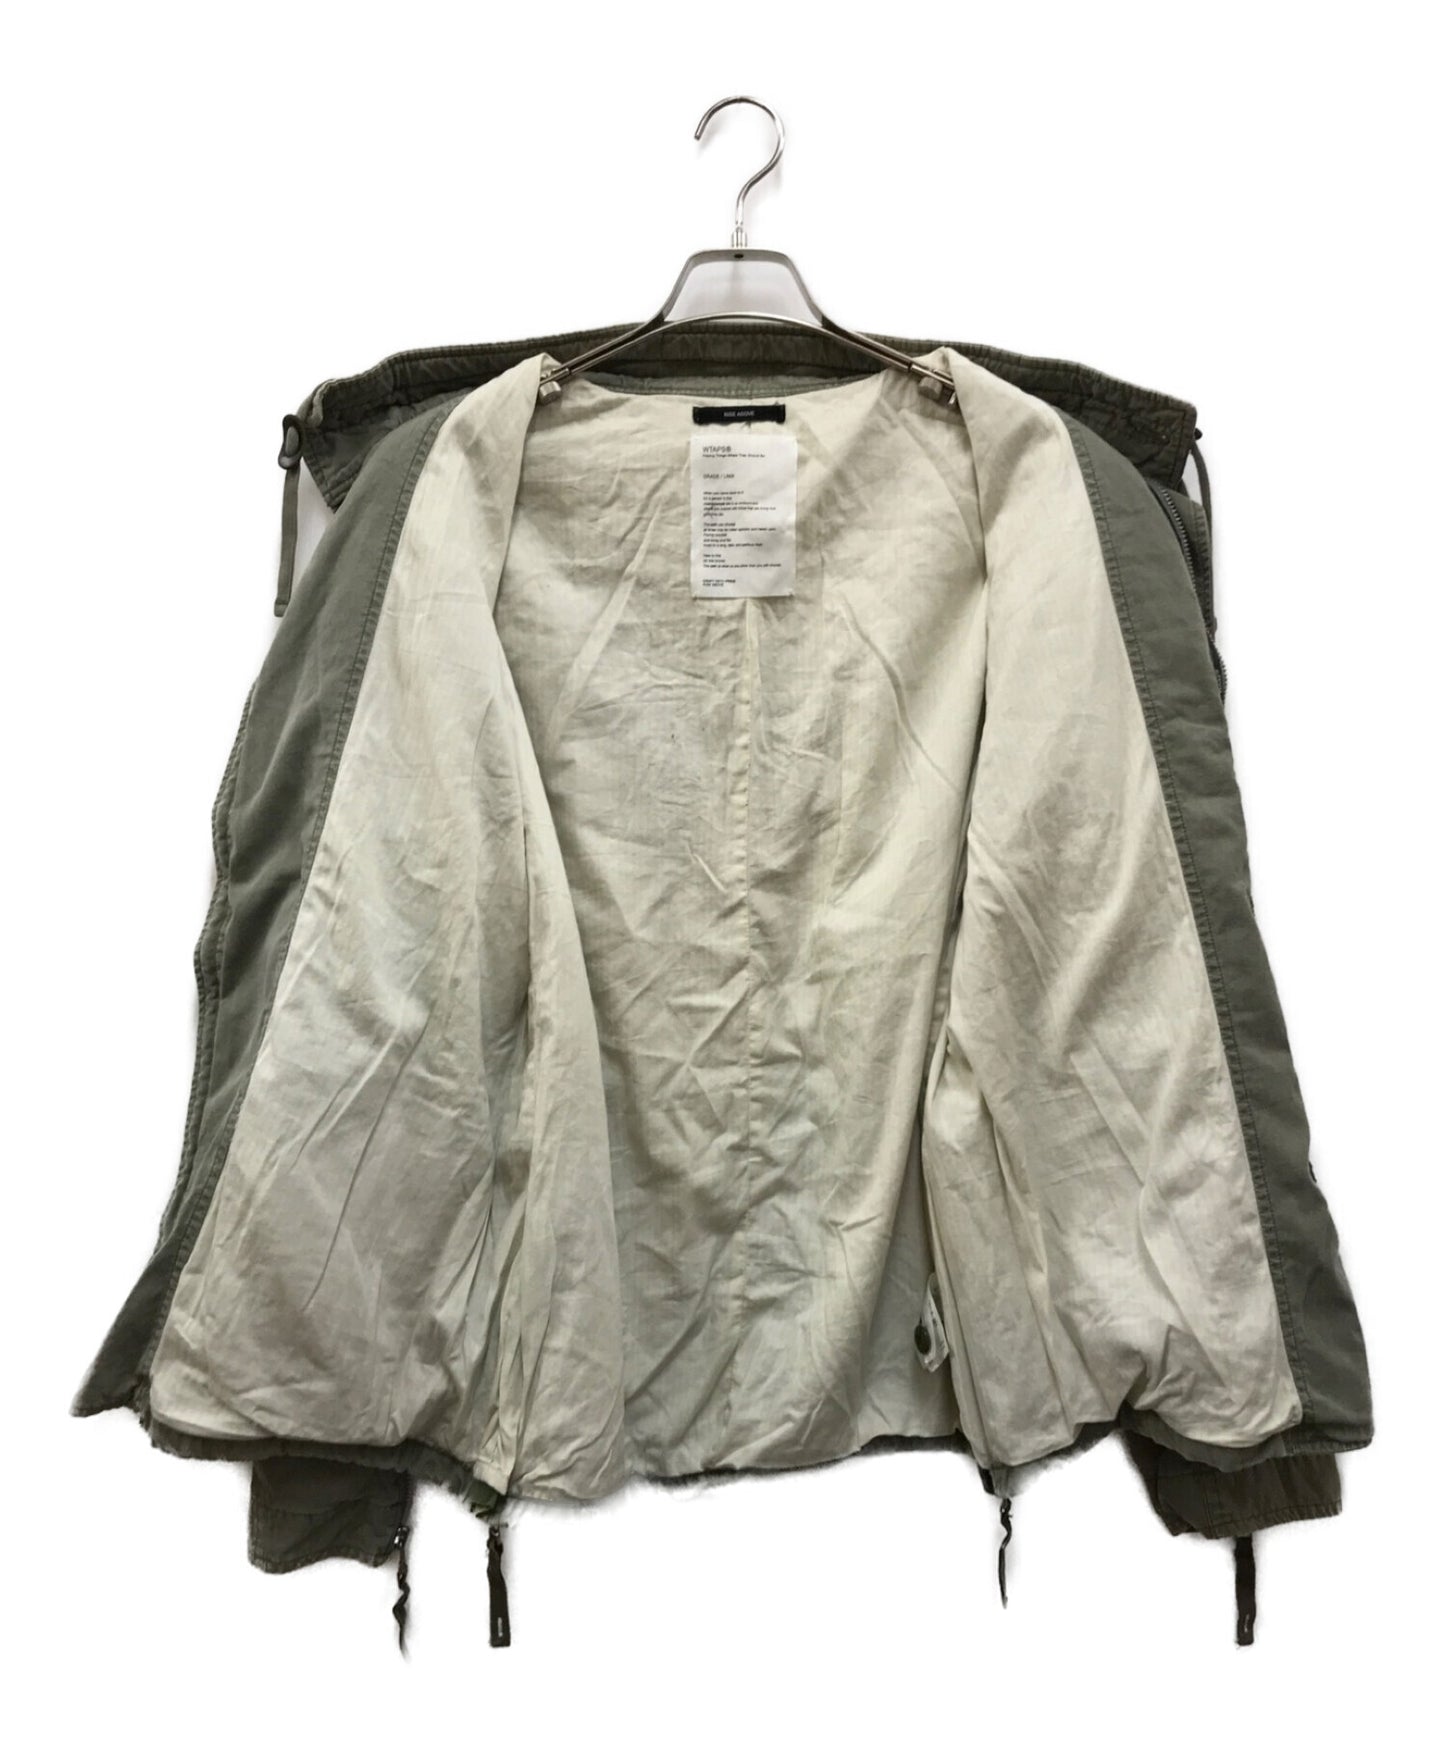 [Pre-owned] WTAPS M-65 Military Jacket 2009/1st 091GWDT-JKM04